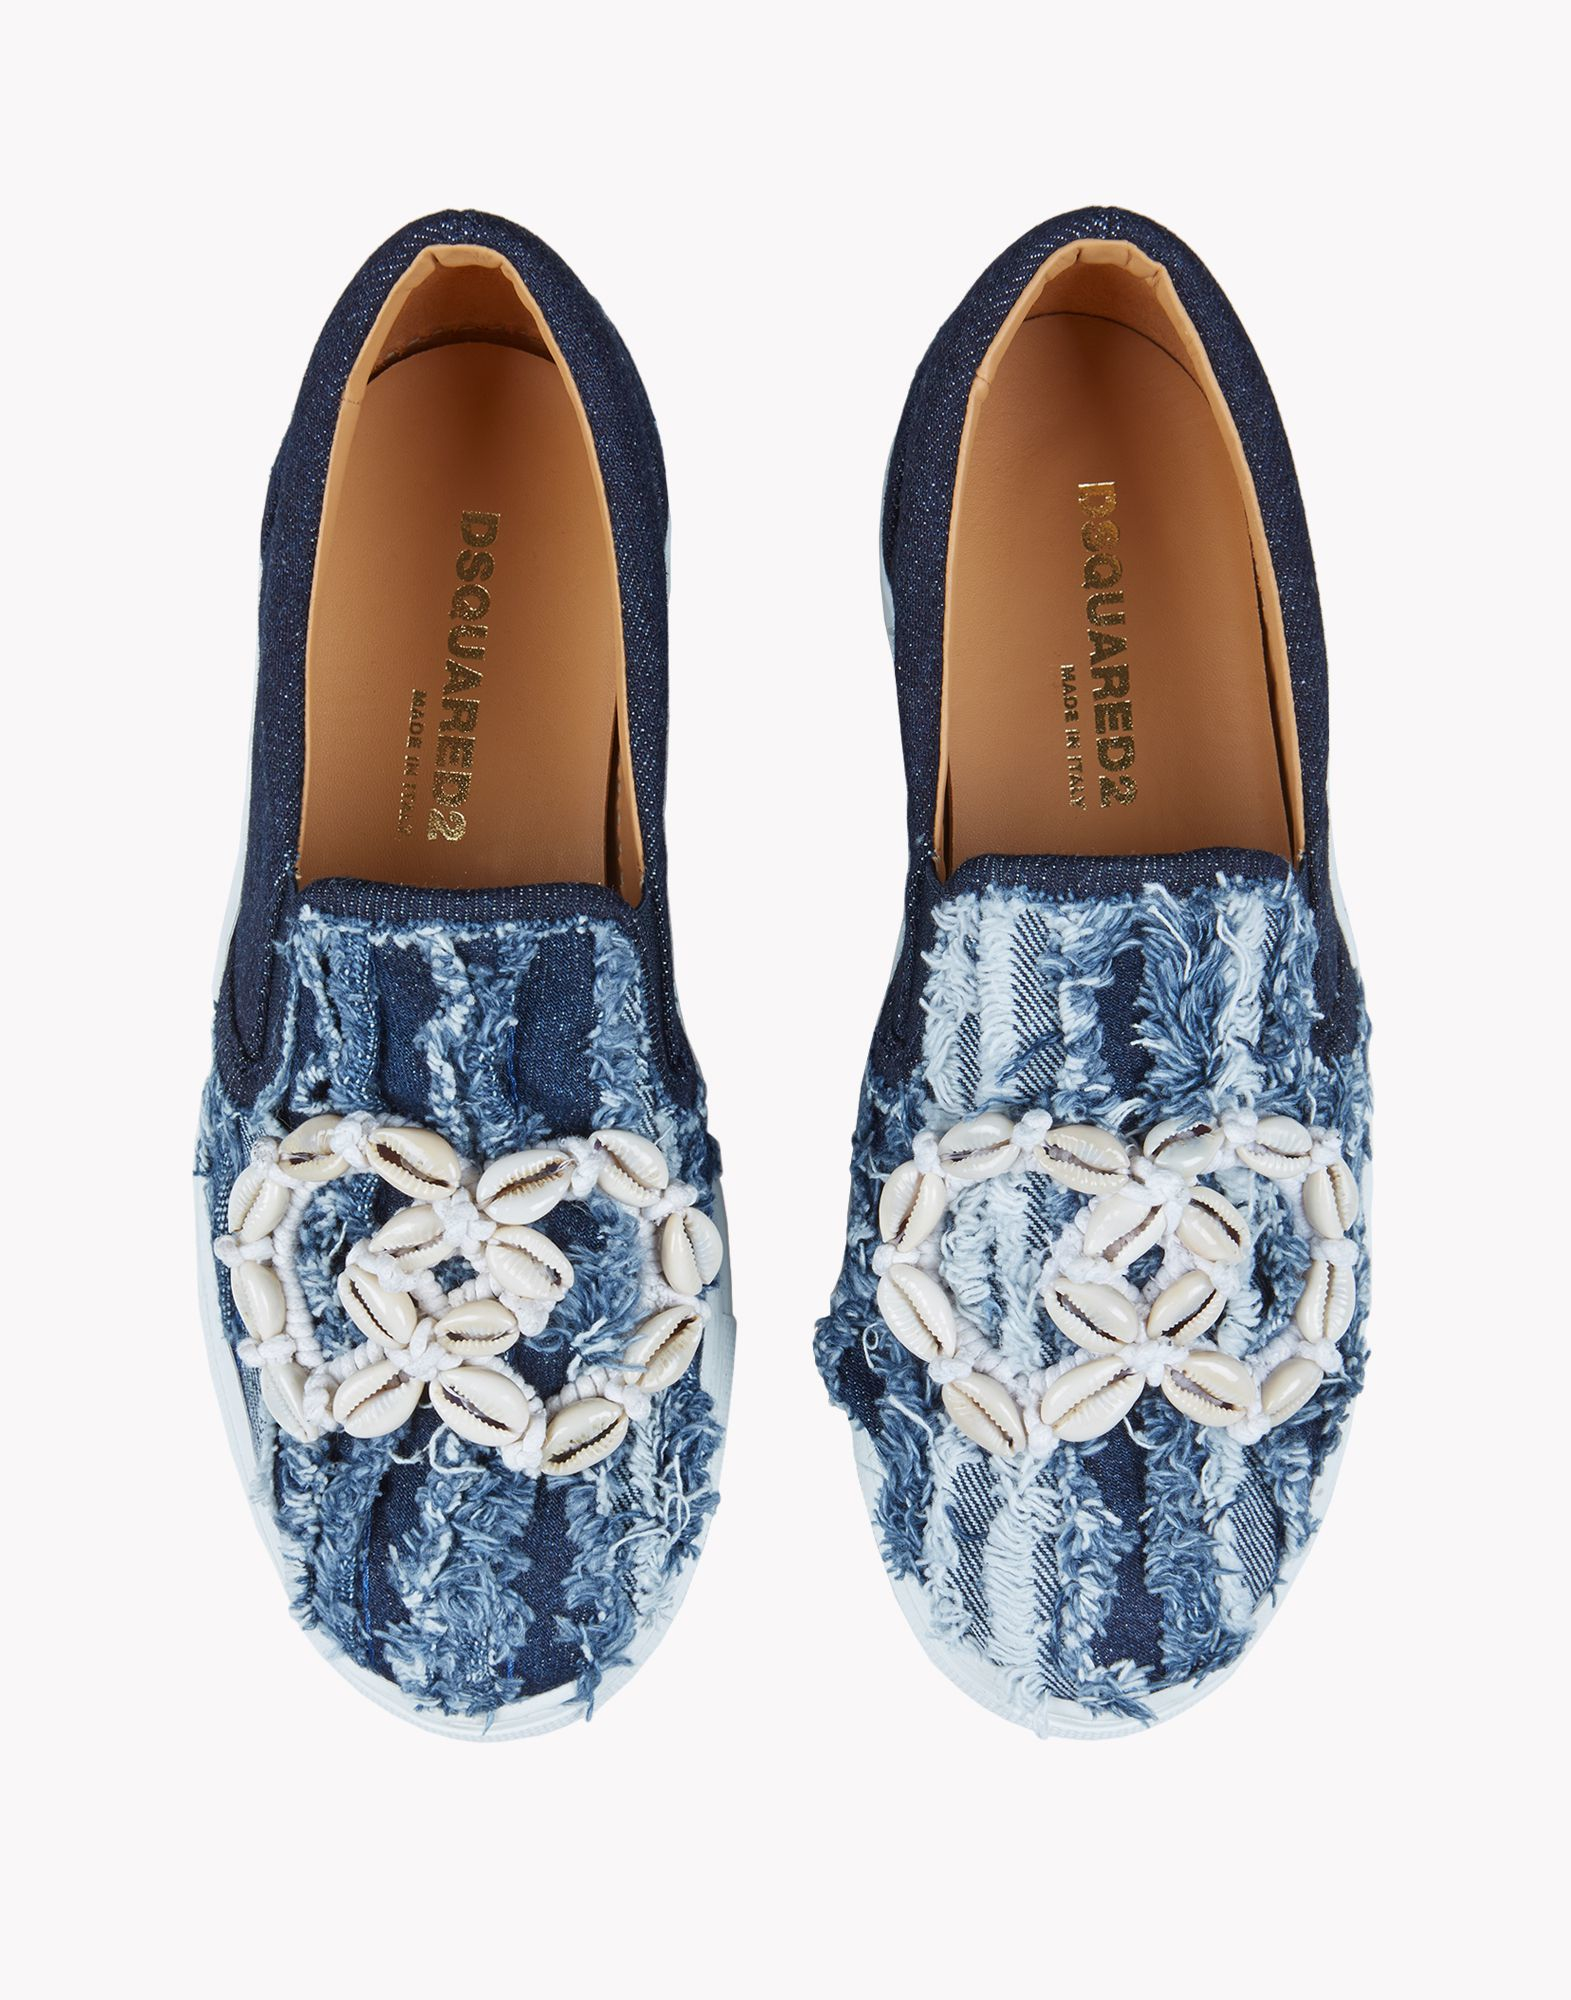 DSquared² Distressed Cotton Denim Slip-on Sneakers in Blue - Lyst